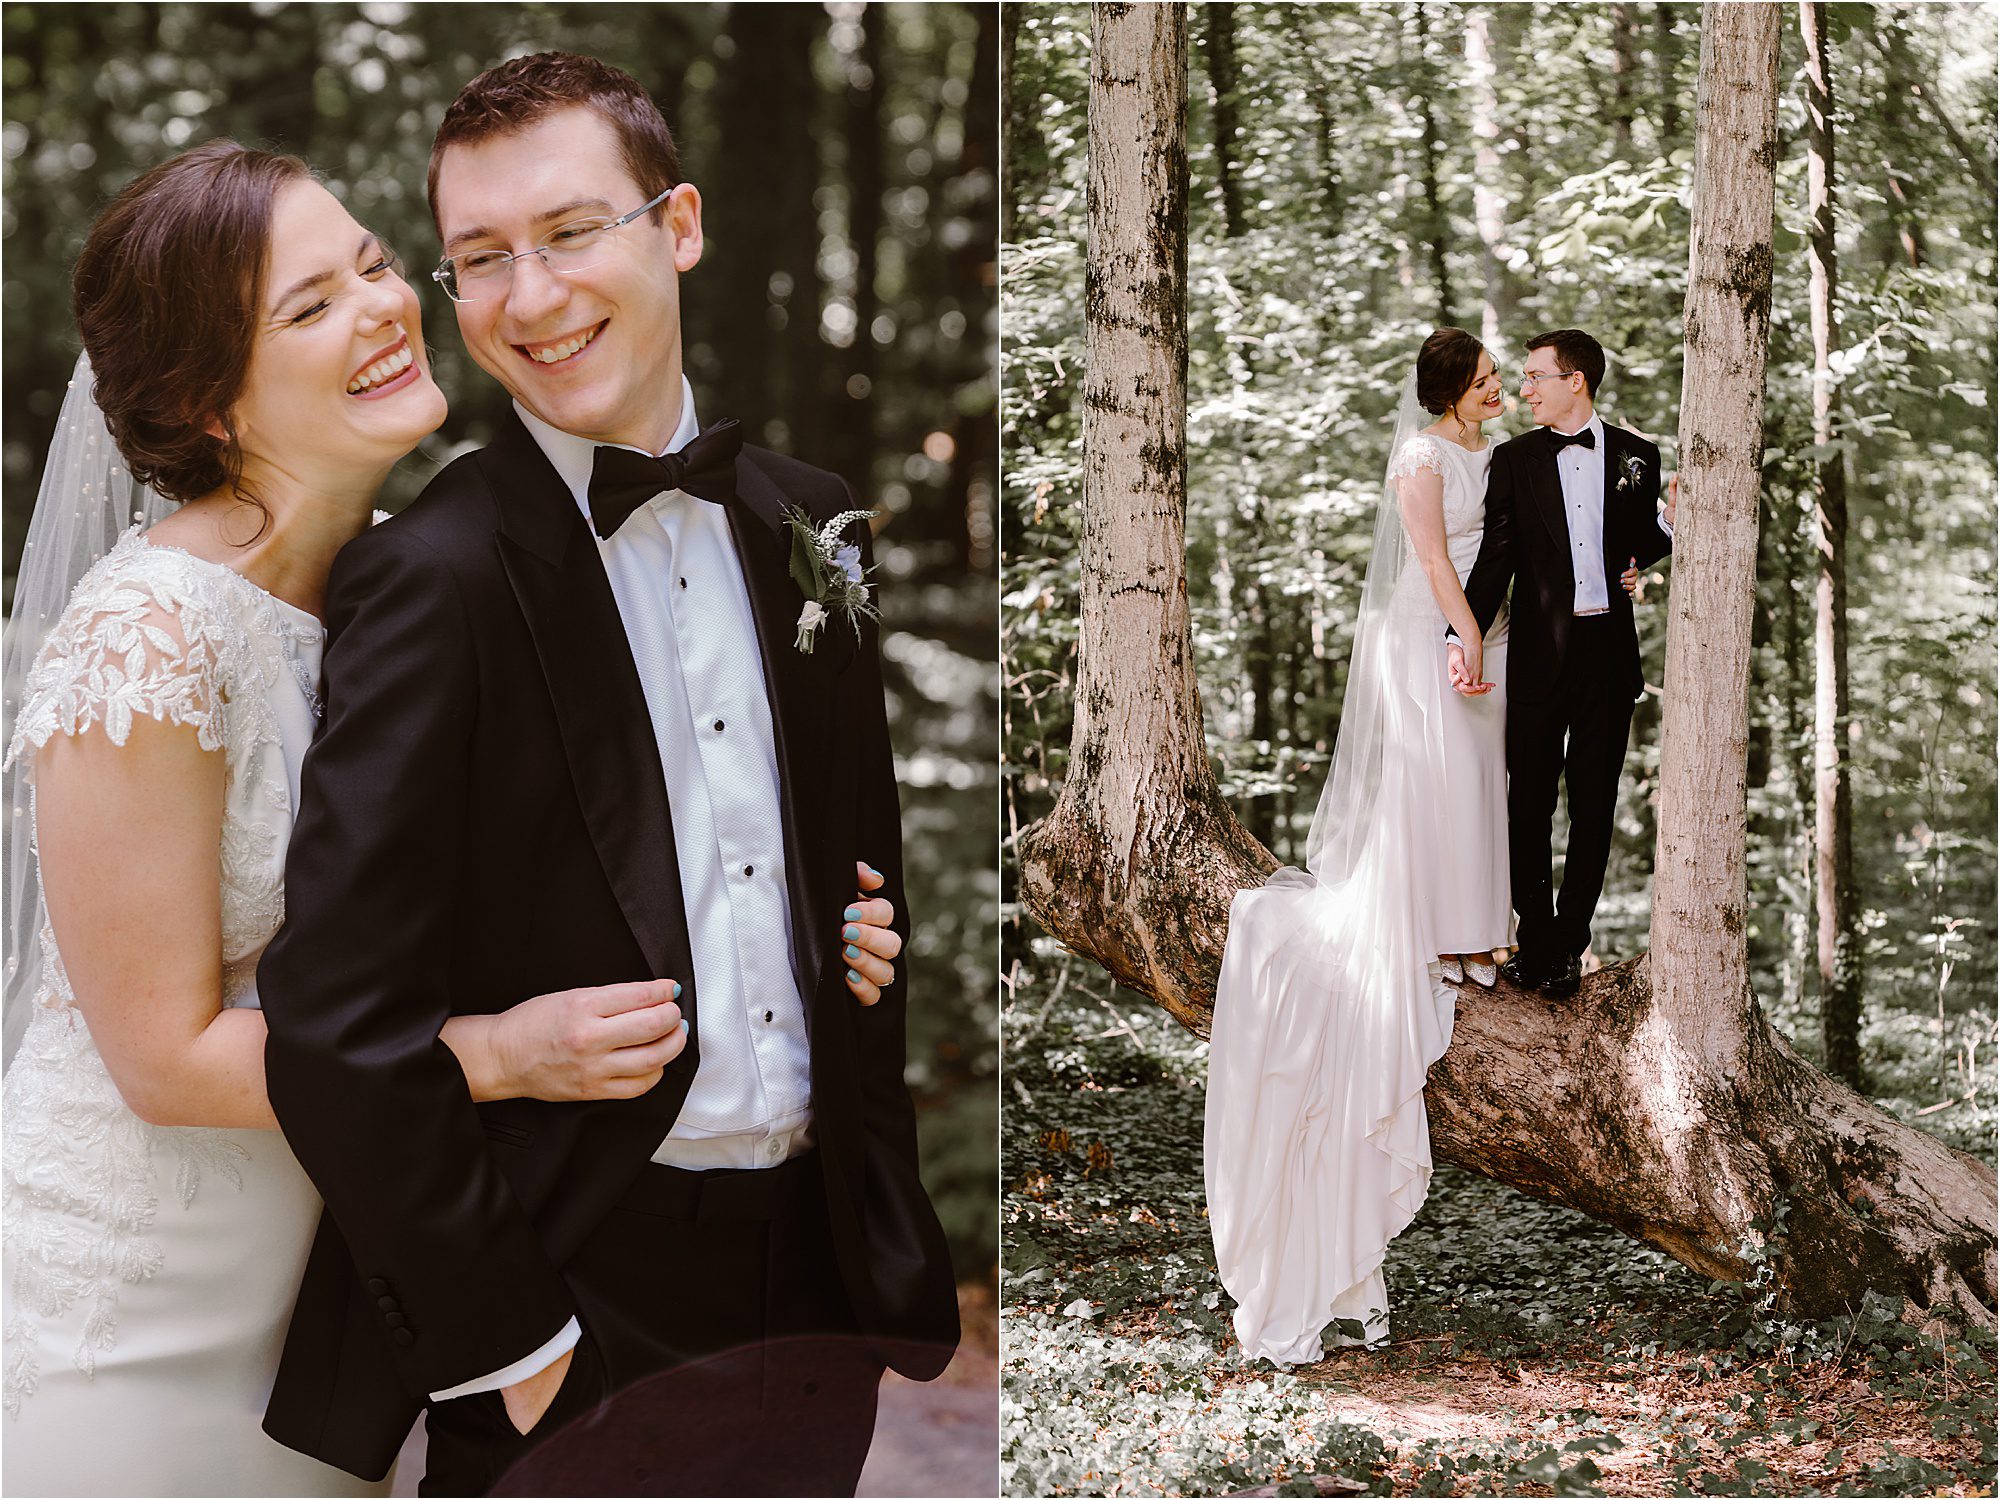 What is a micro wedding and how is different from a traditional wedding or elopement?